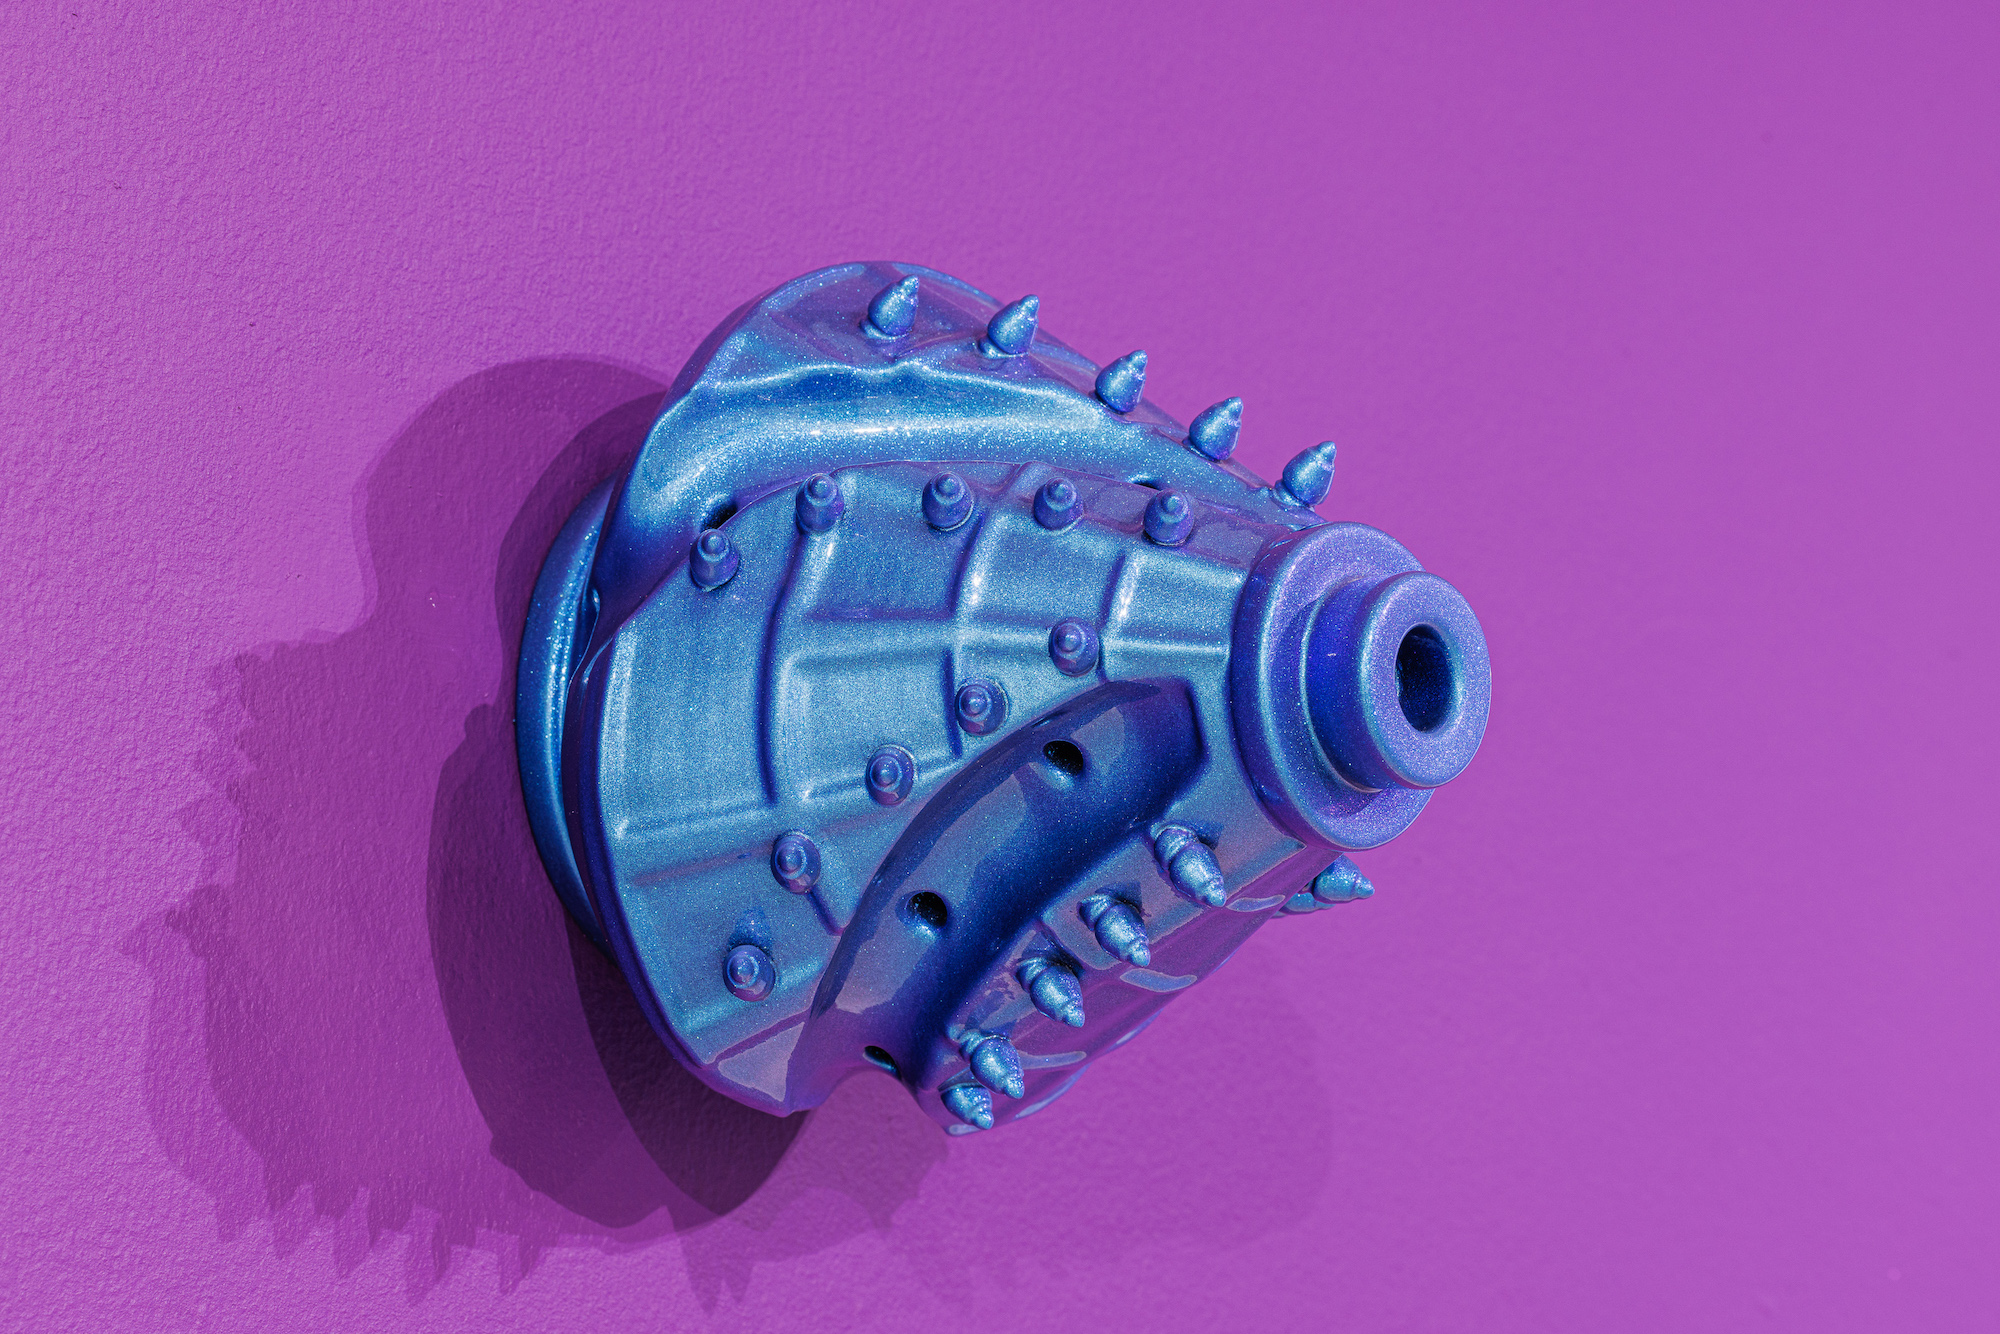 A purple wall with a funky blue drill bit shines opalescently.